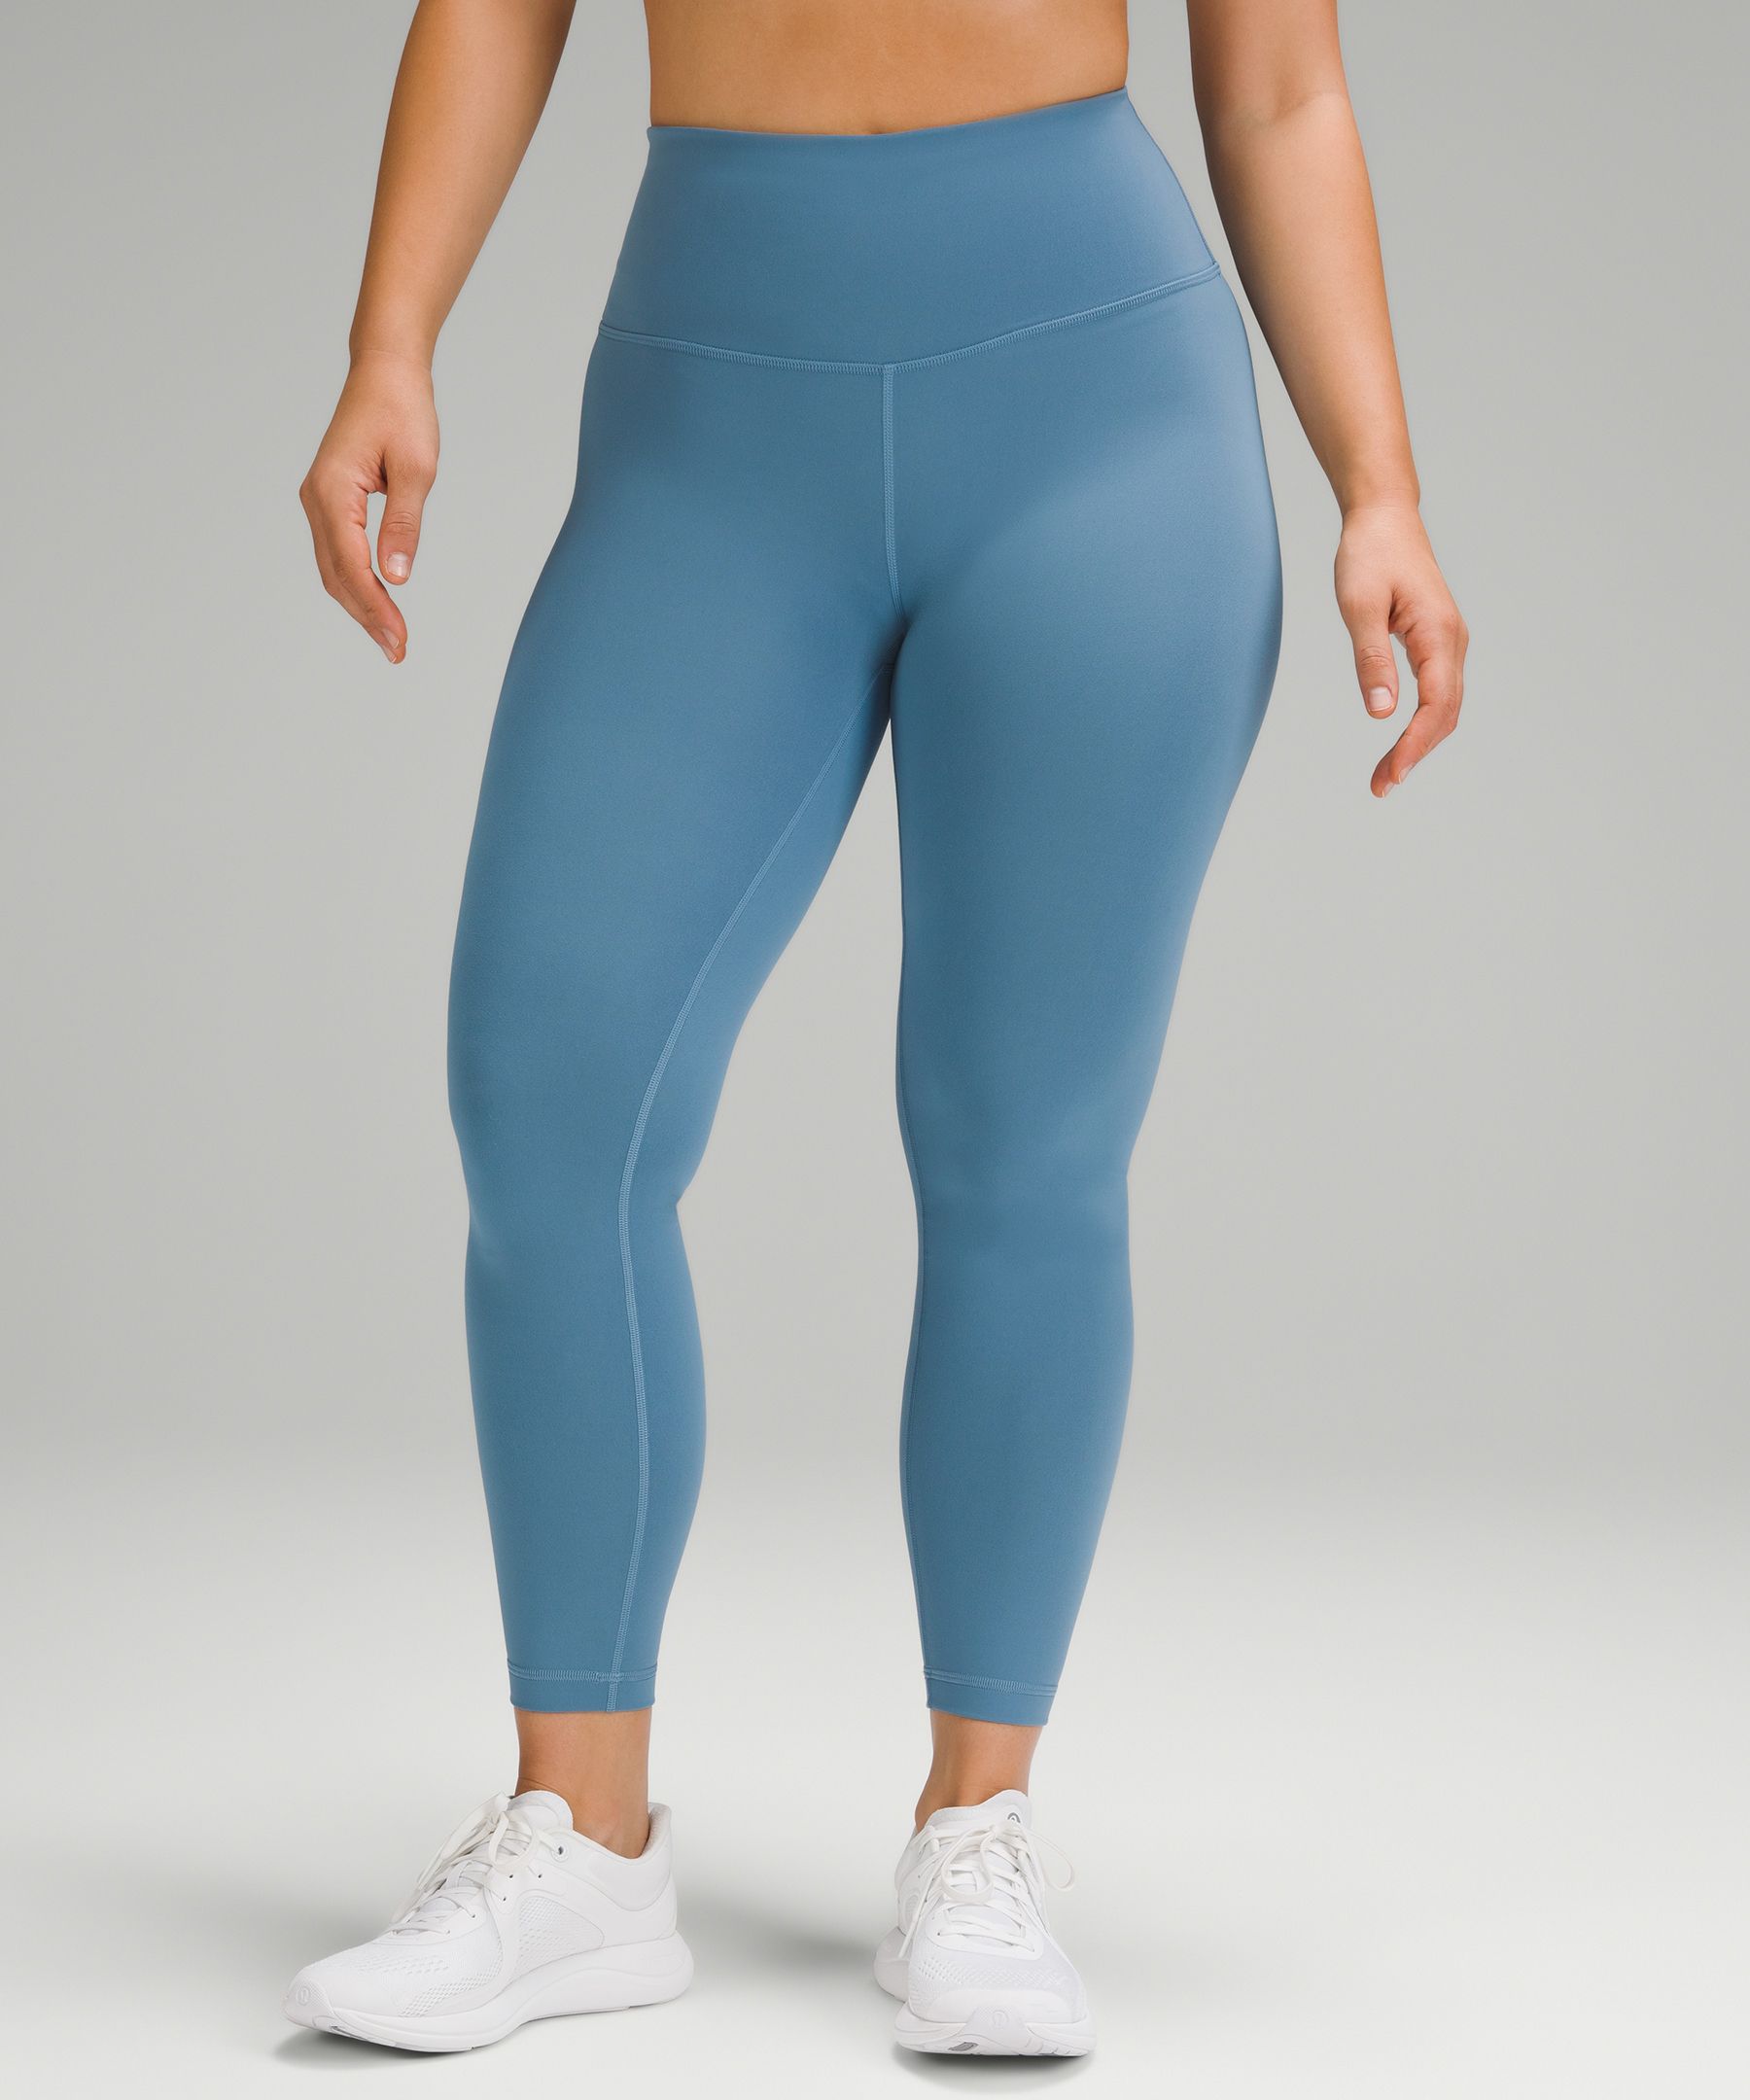 Lululemon athletica Wunder Train Contour Fit High-Rise Tight with Pockets  25, Women's Pants